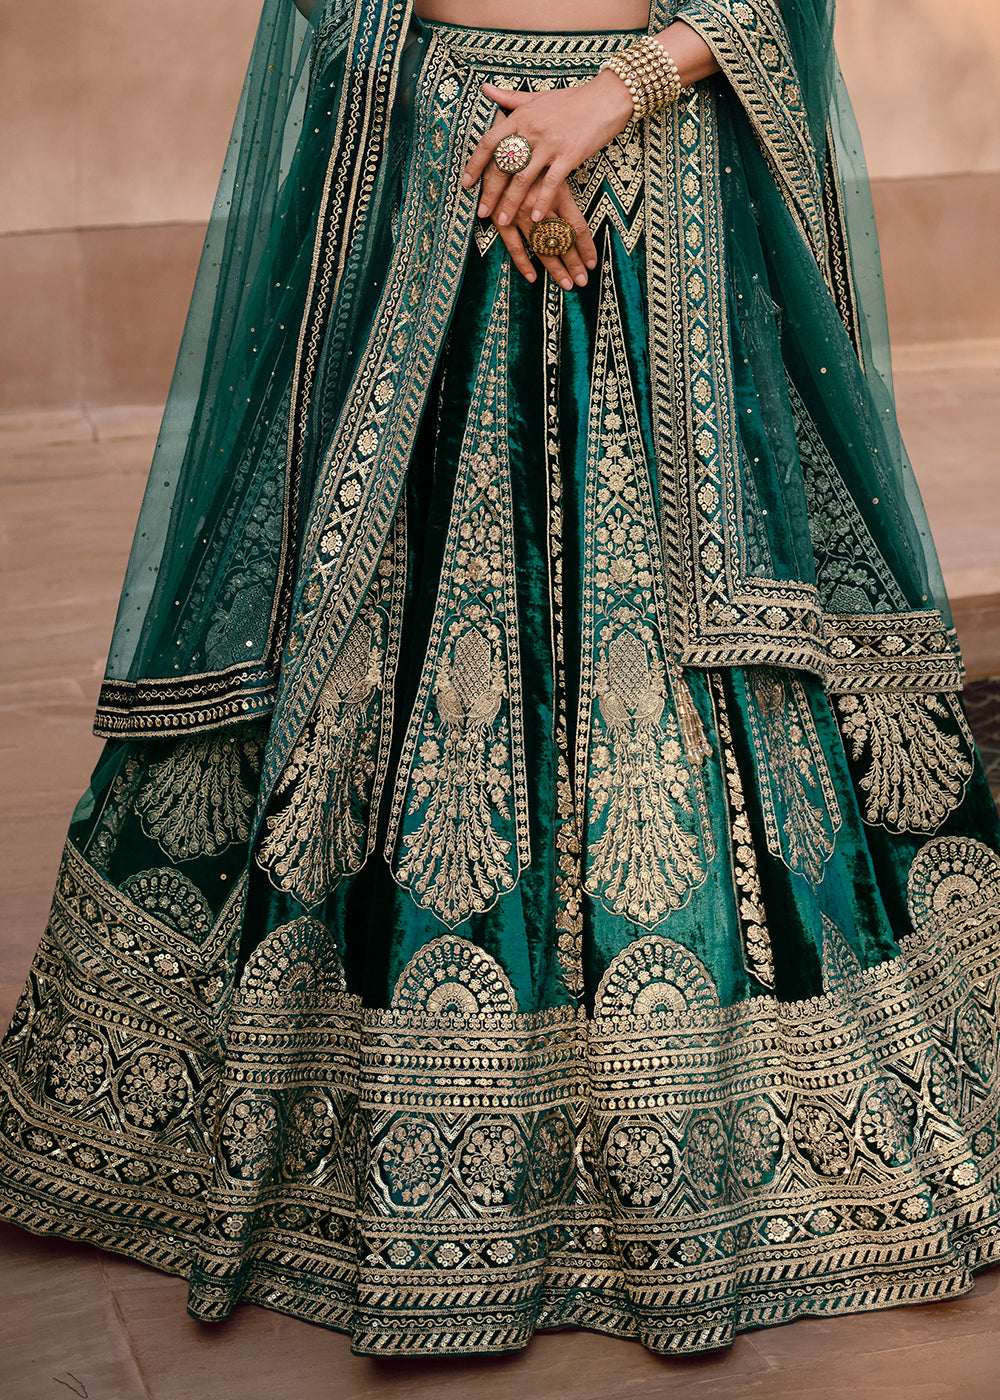 Shades Of Green Ready to Wear Designer Viscose Lycra Silk Lehenga Choli With Fully Embroidered work